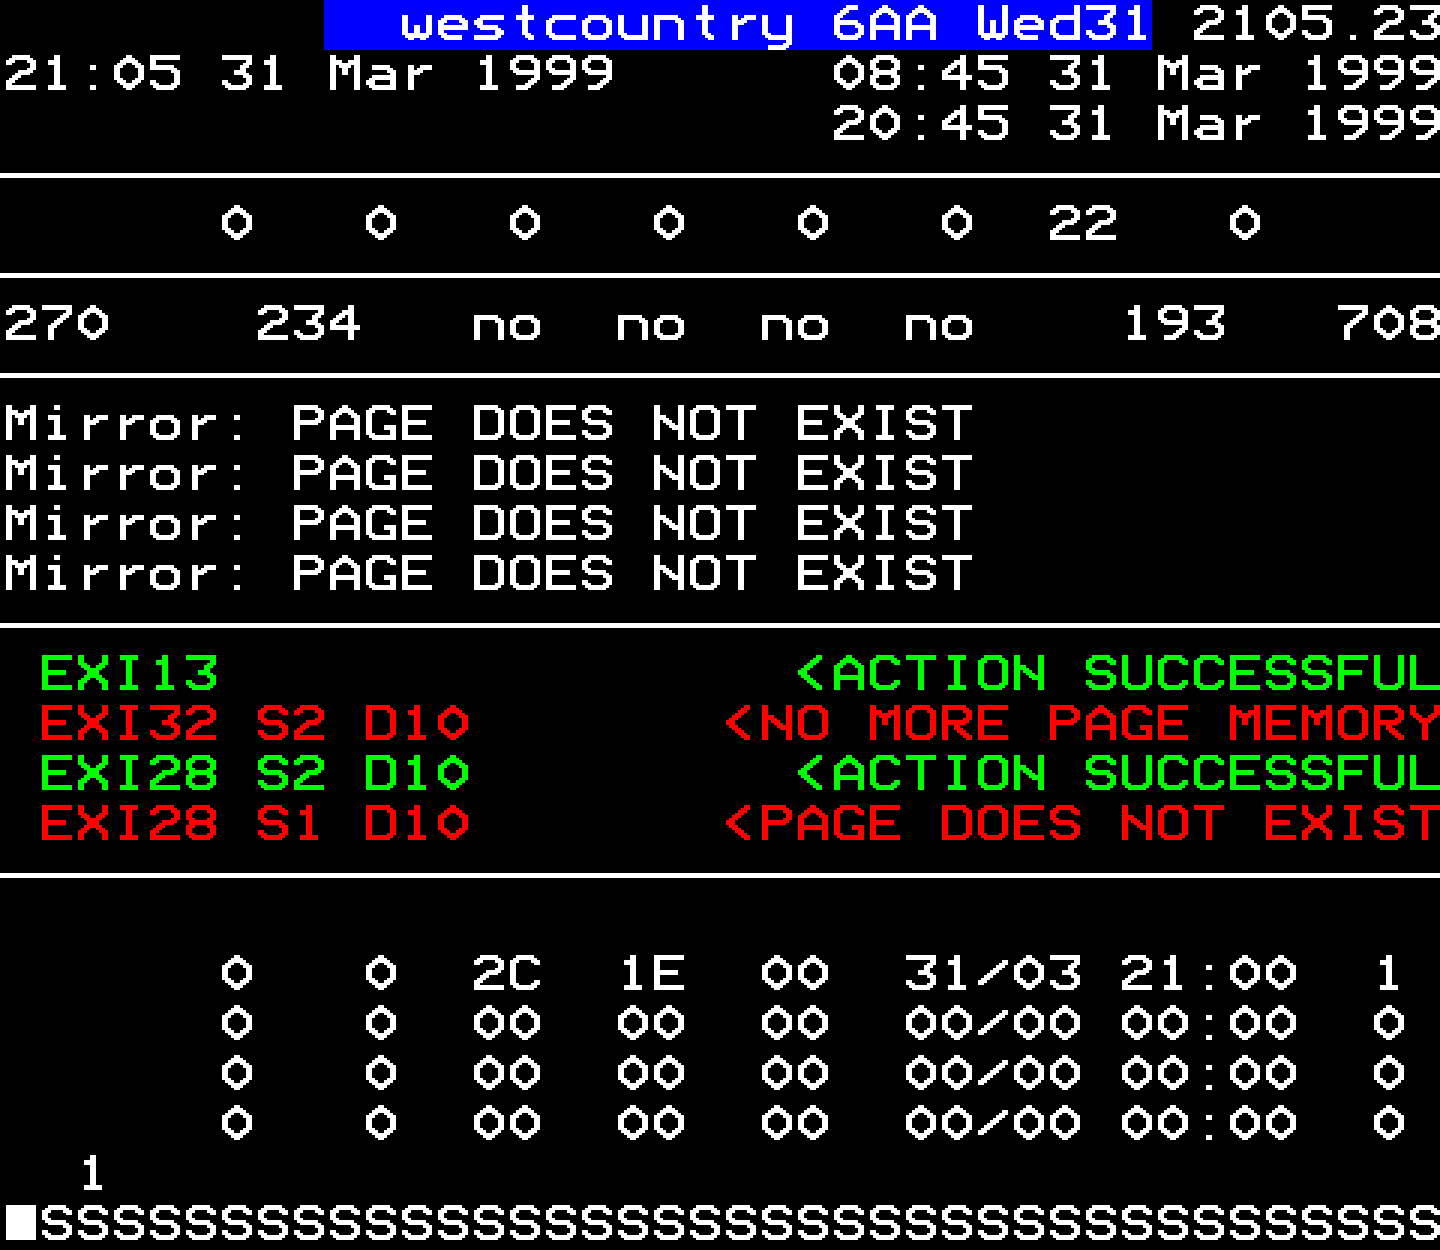 Mysterious teletext log page 6AA.